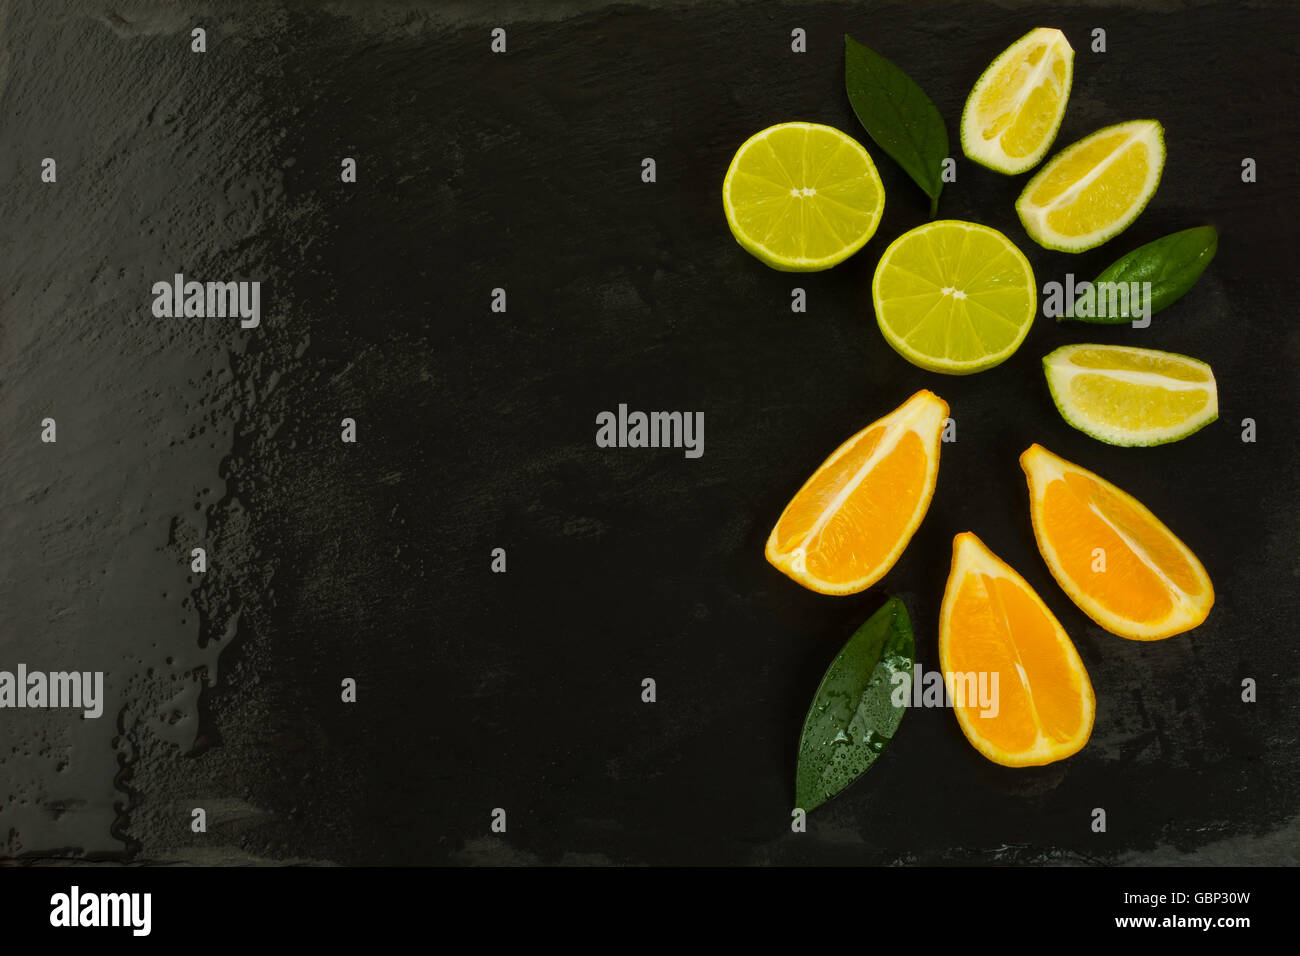 Lime and Lemon slices on black background. Healthy eating concept with ripe mixed fruits. Vegan and vegetarian food as fruit Stock Photo